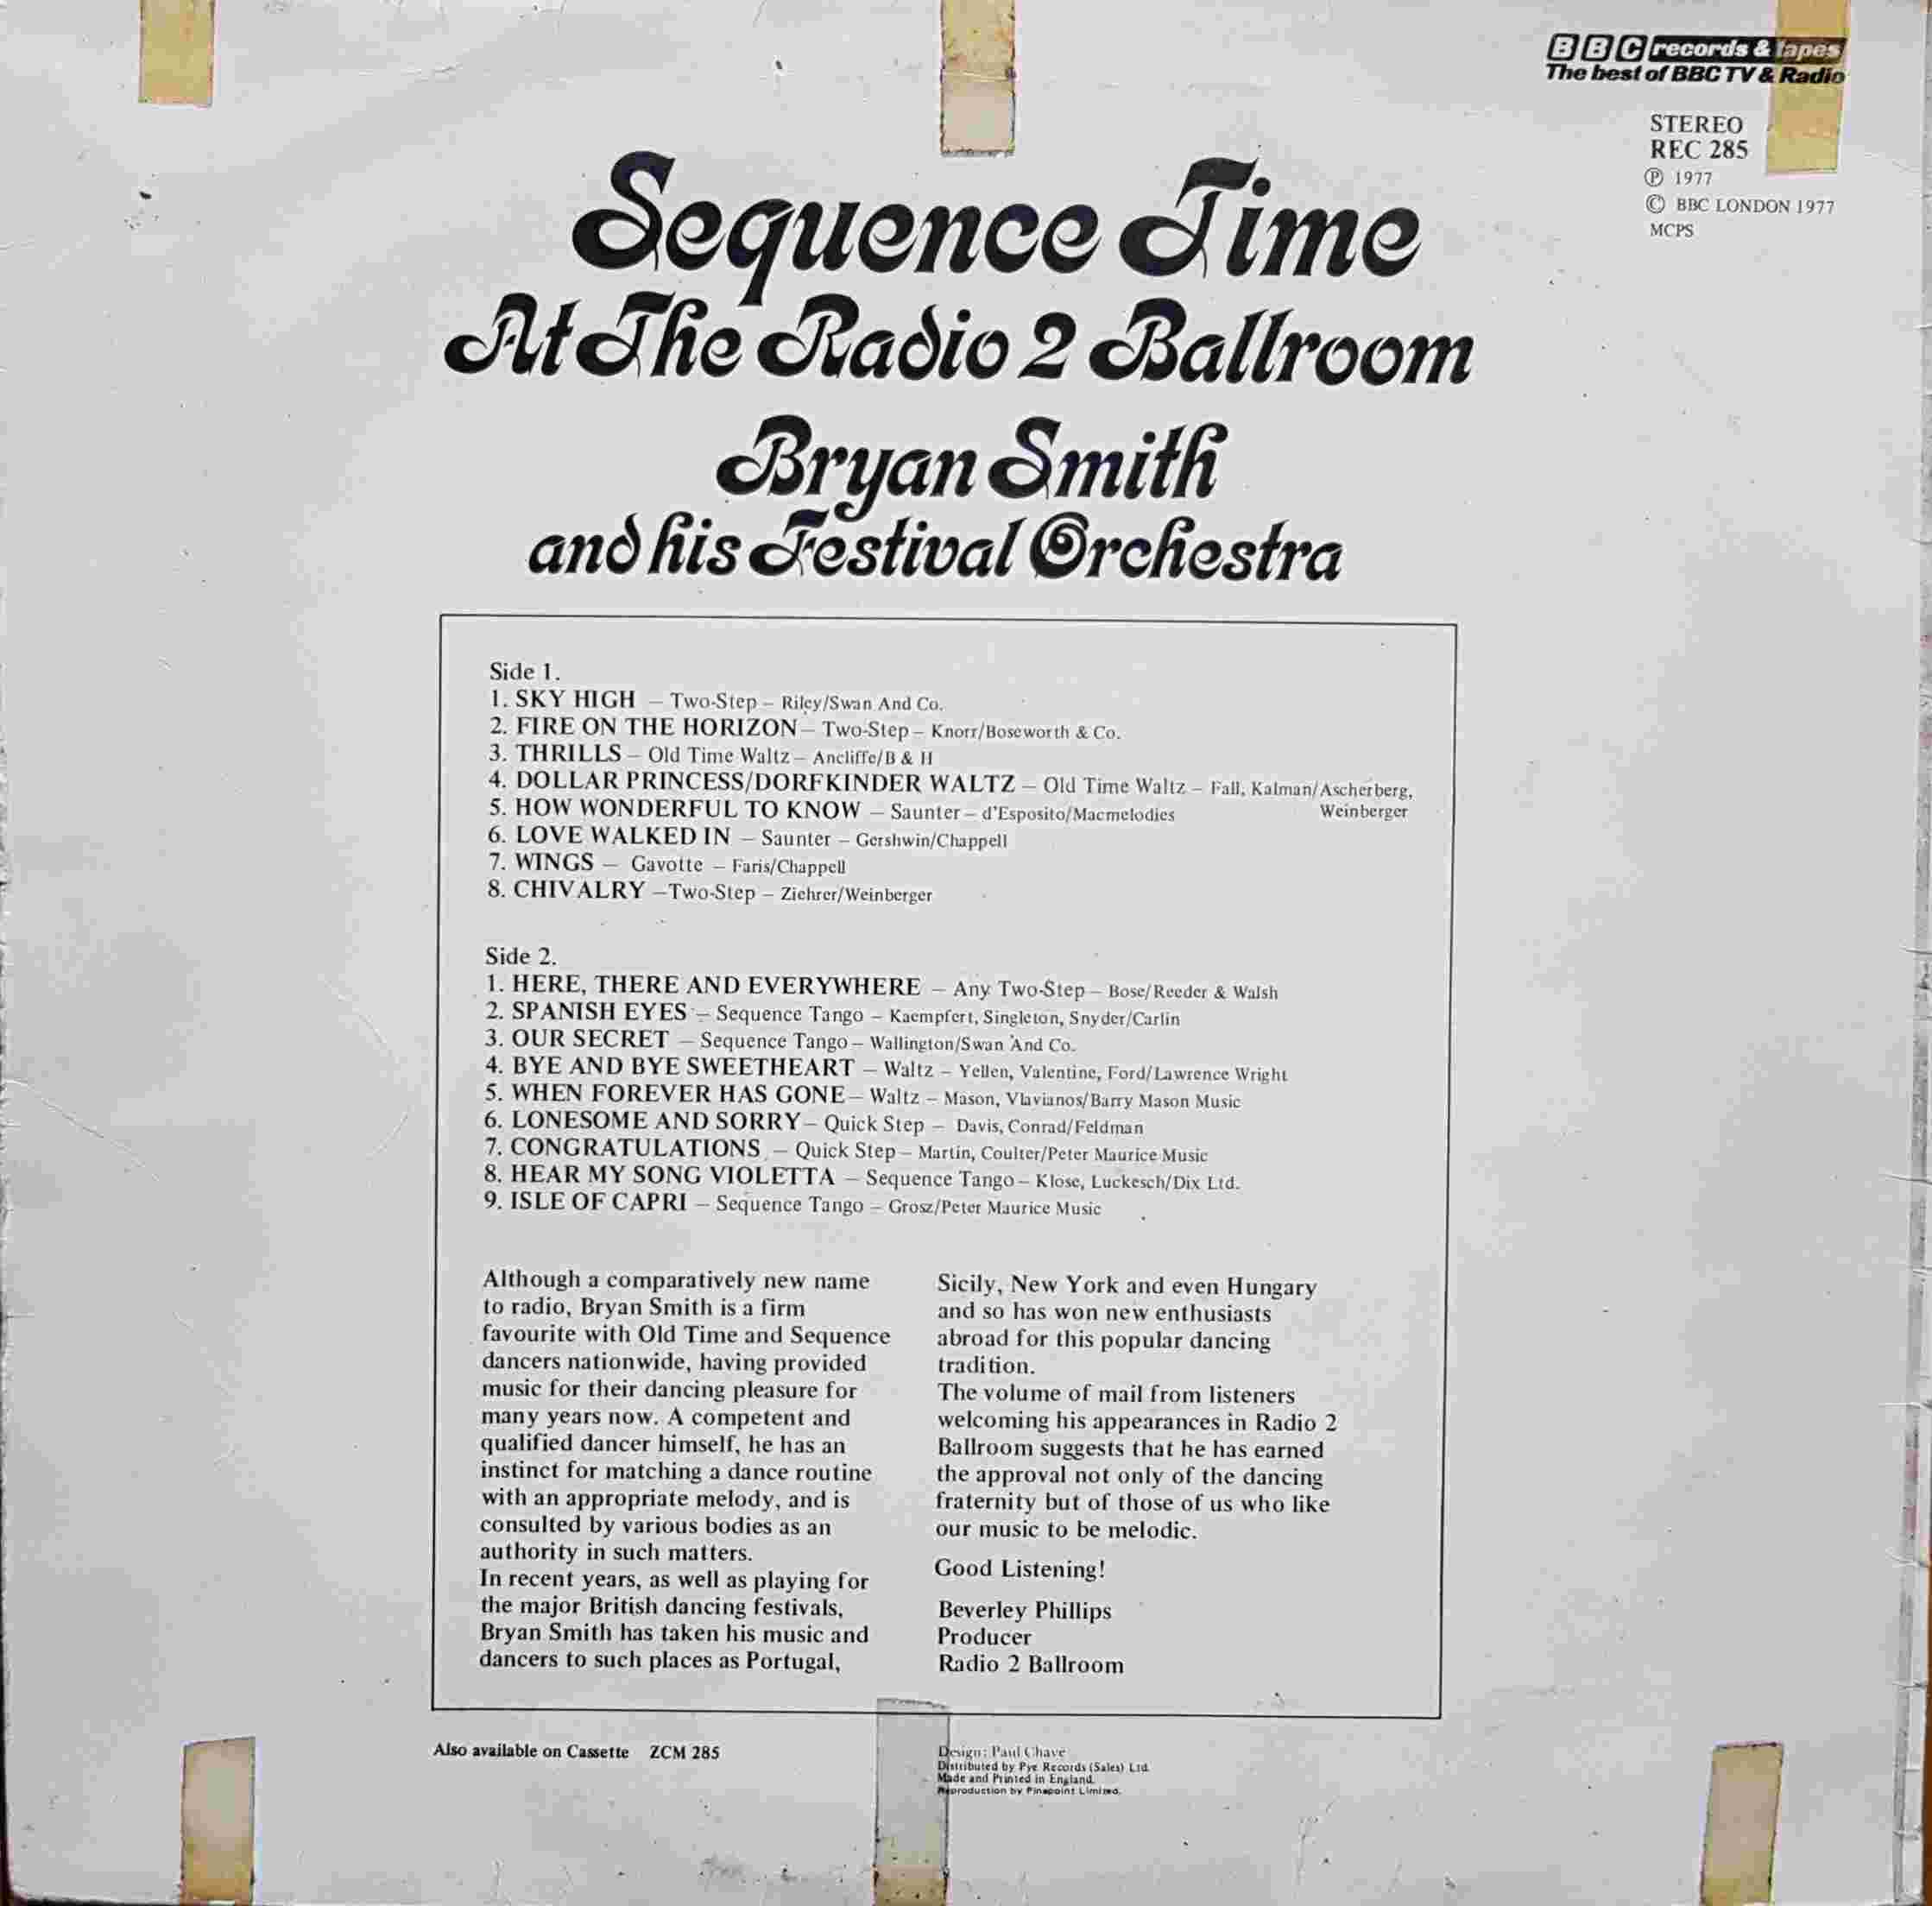 Picture of REC 285 Sequence time at the Radio 2 ballroom by artist Various from the BBC records and Tapes library